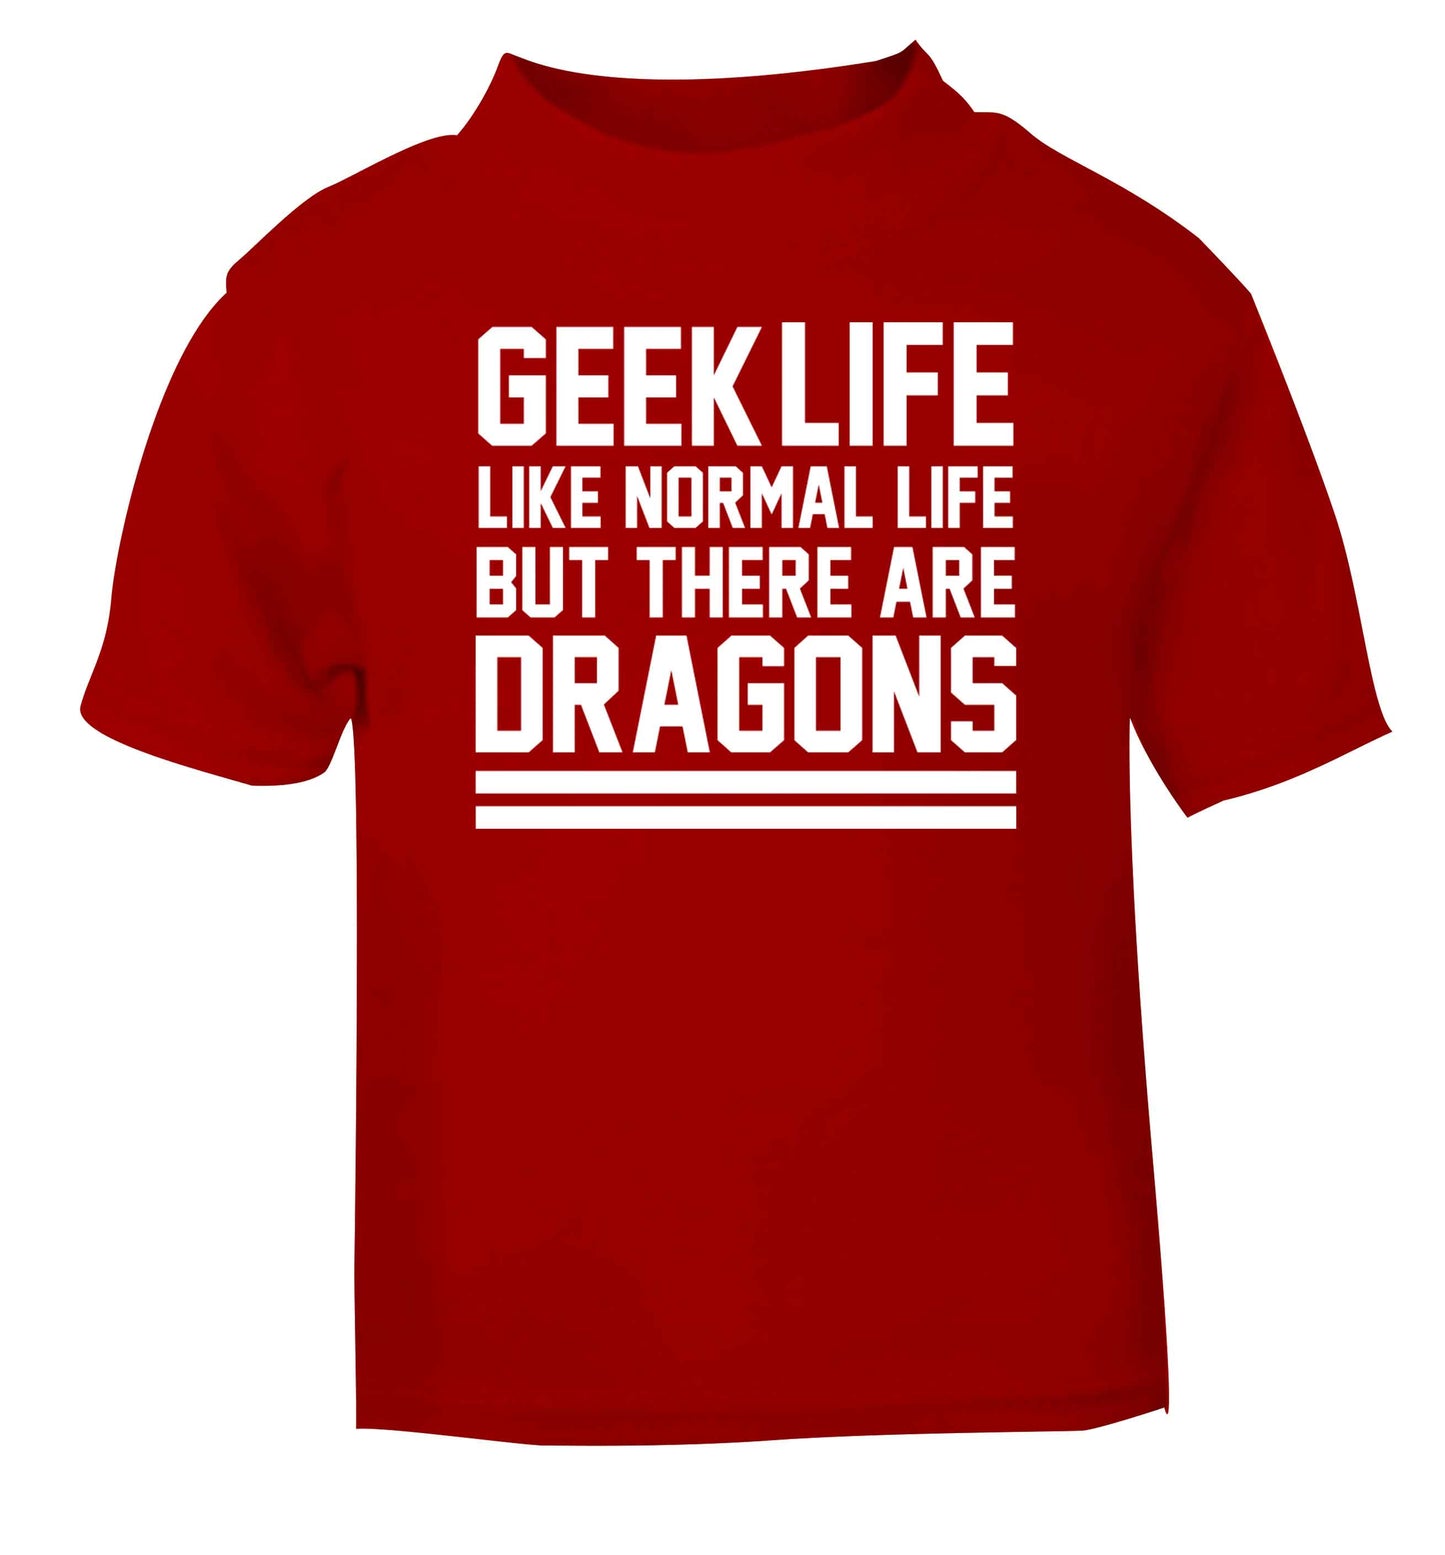 Geek life like normal life but there are dragons red baby toddler Tshirt 2 Years